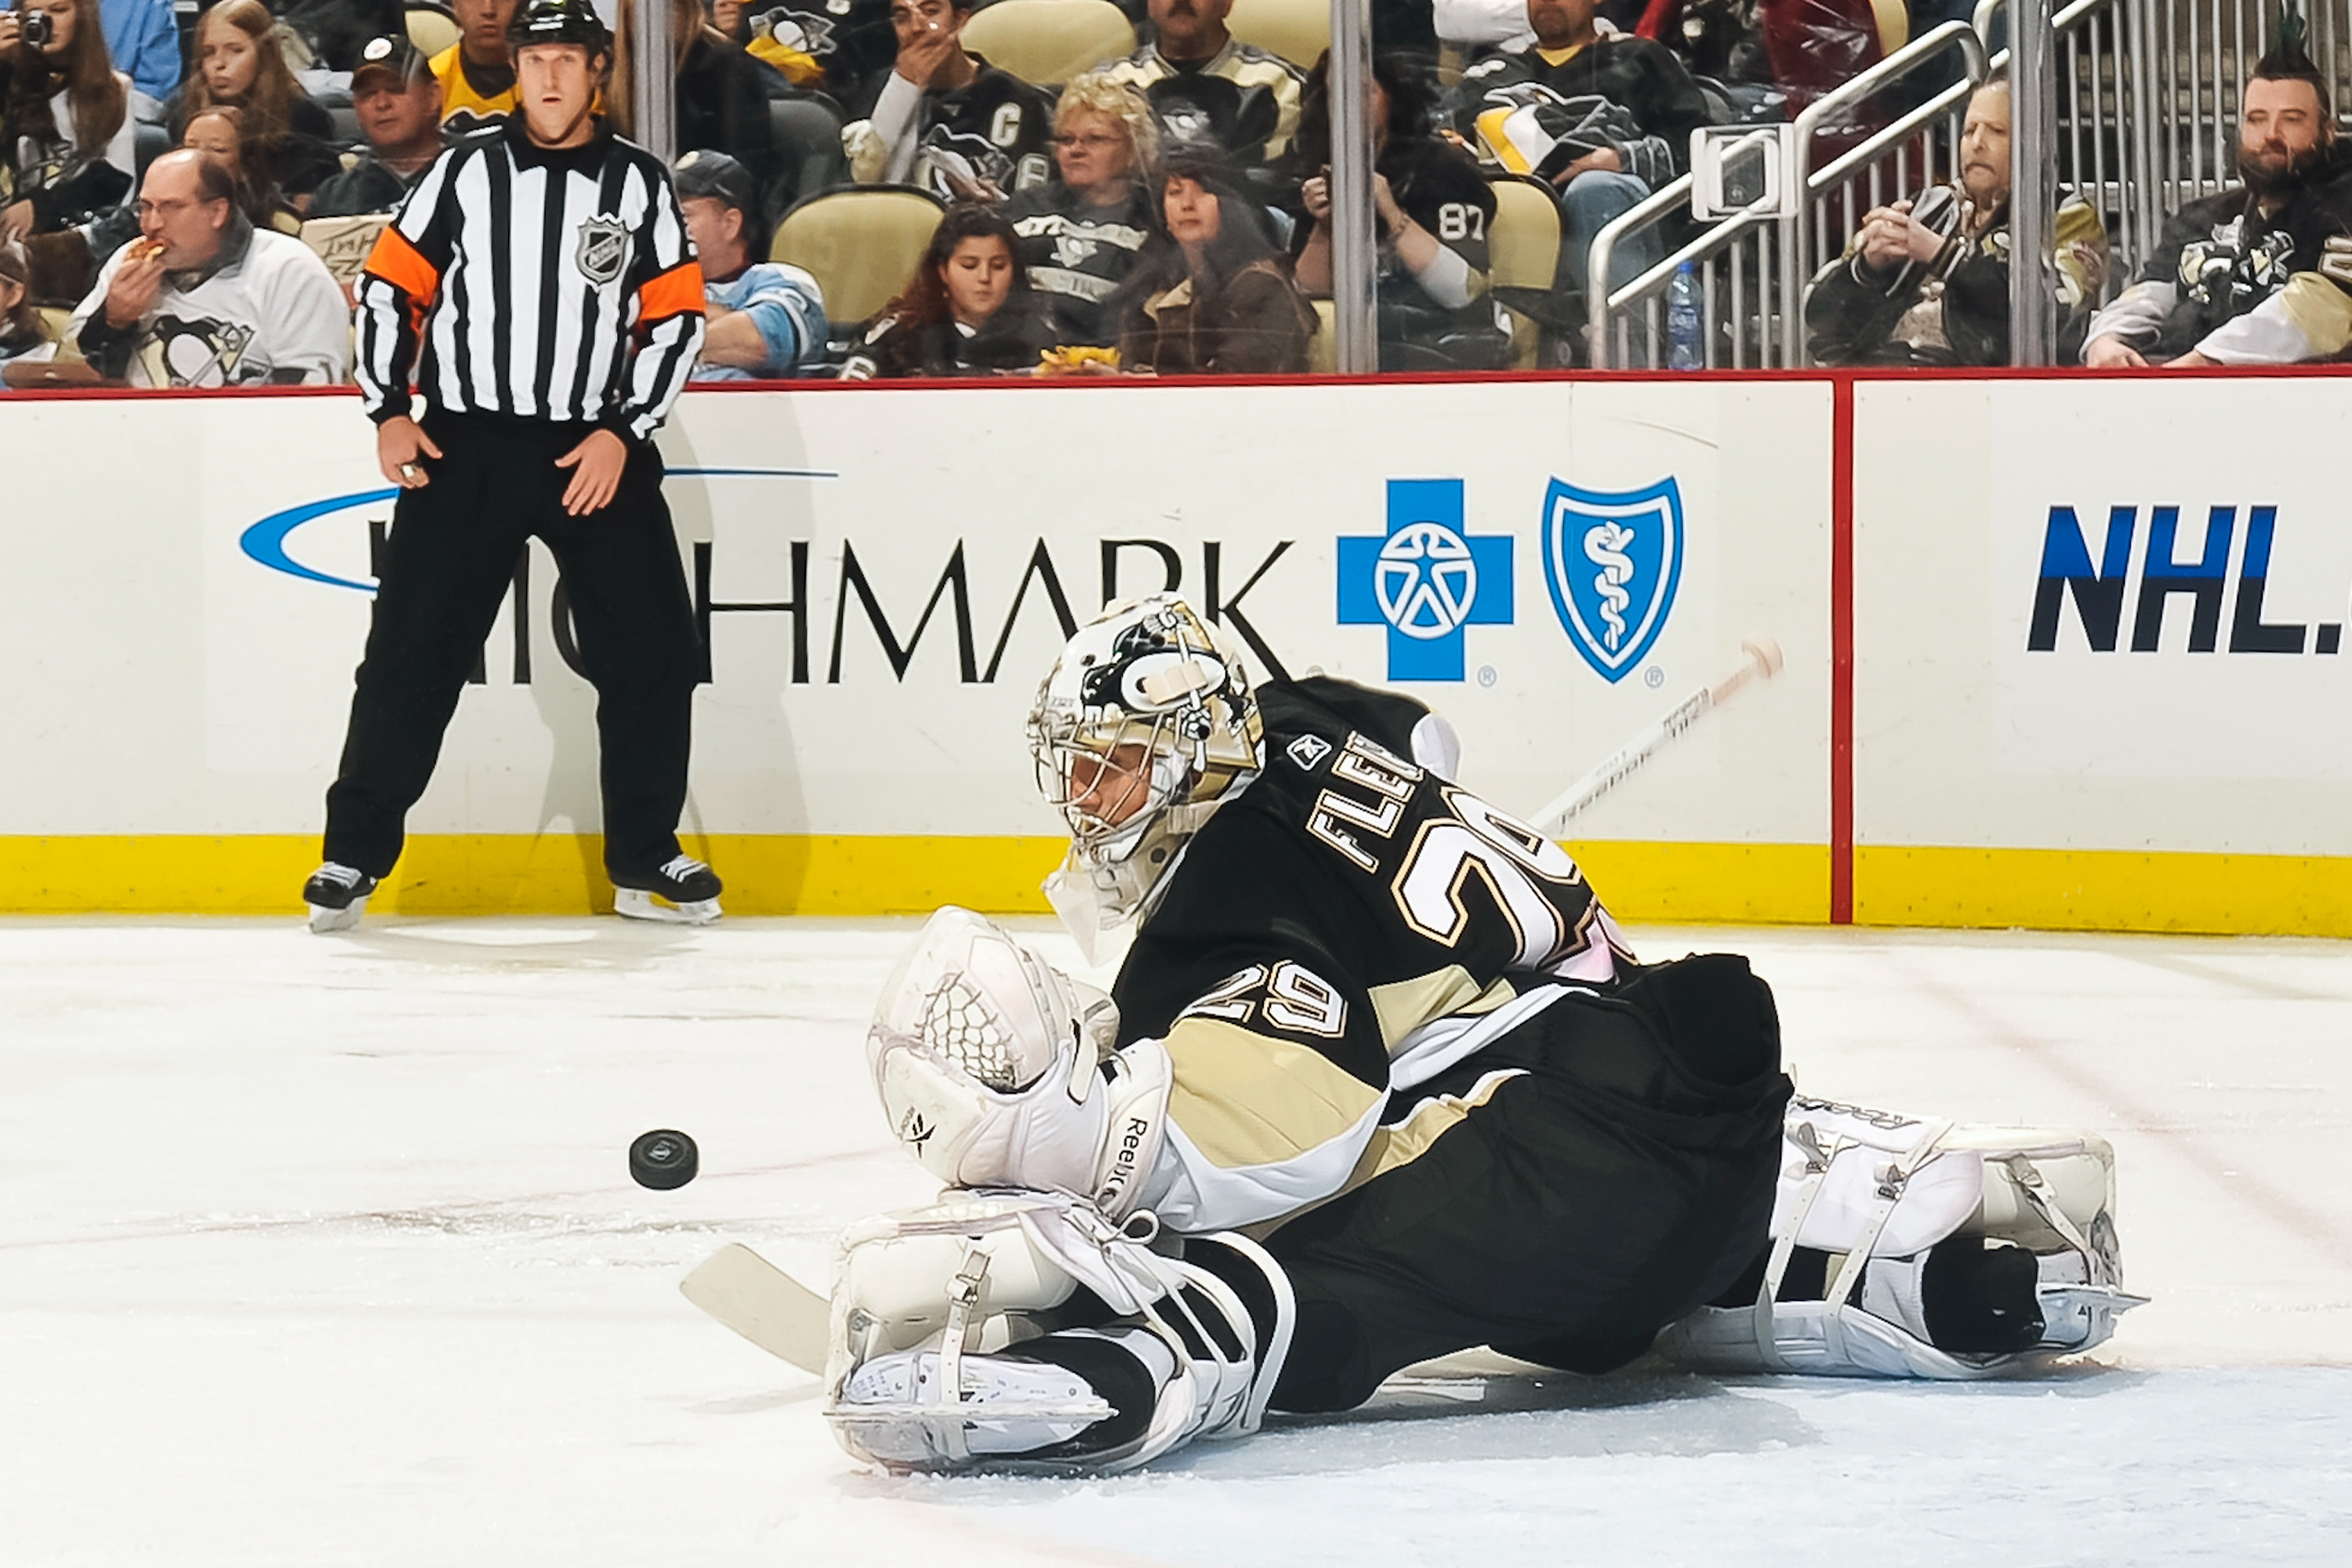 Penguins goalie Marc-Andre Fleury among unprotected players - The